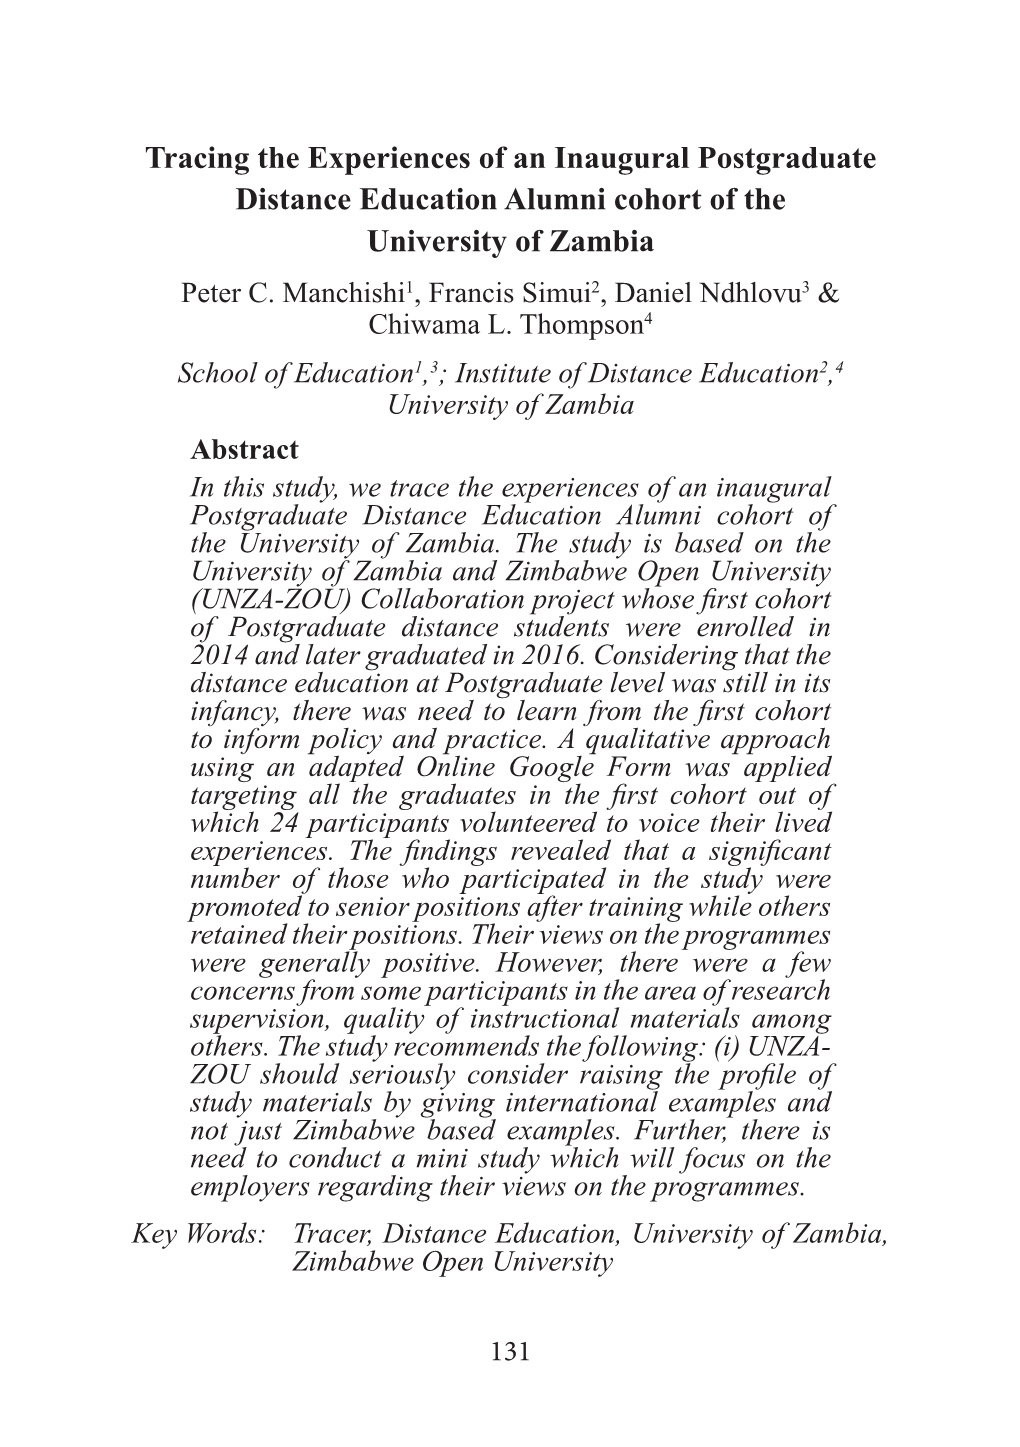 Tracing the Experiences of an Inaugural Postgraduate Distance Education Alumni Cohort of the University of Zambia Peter C